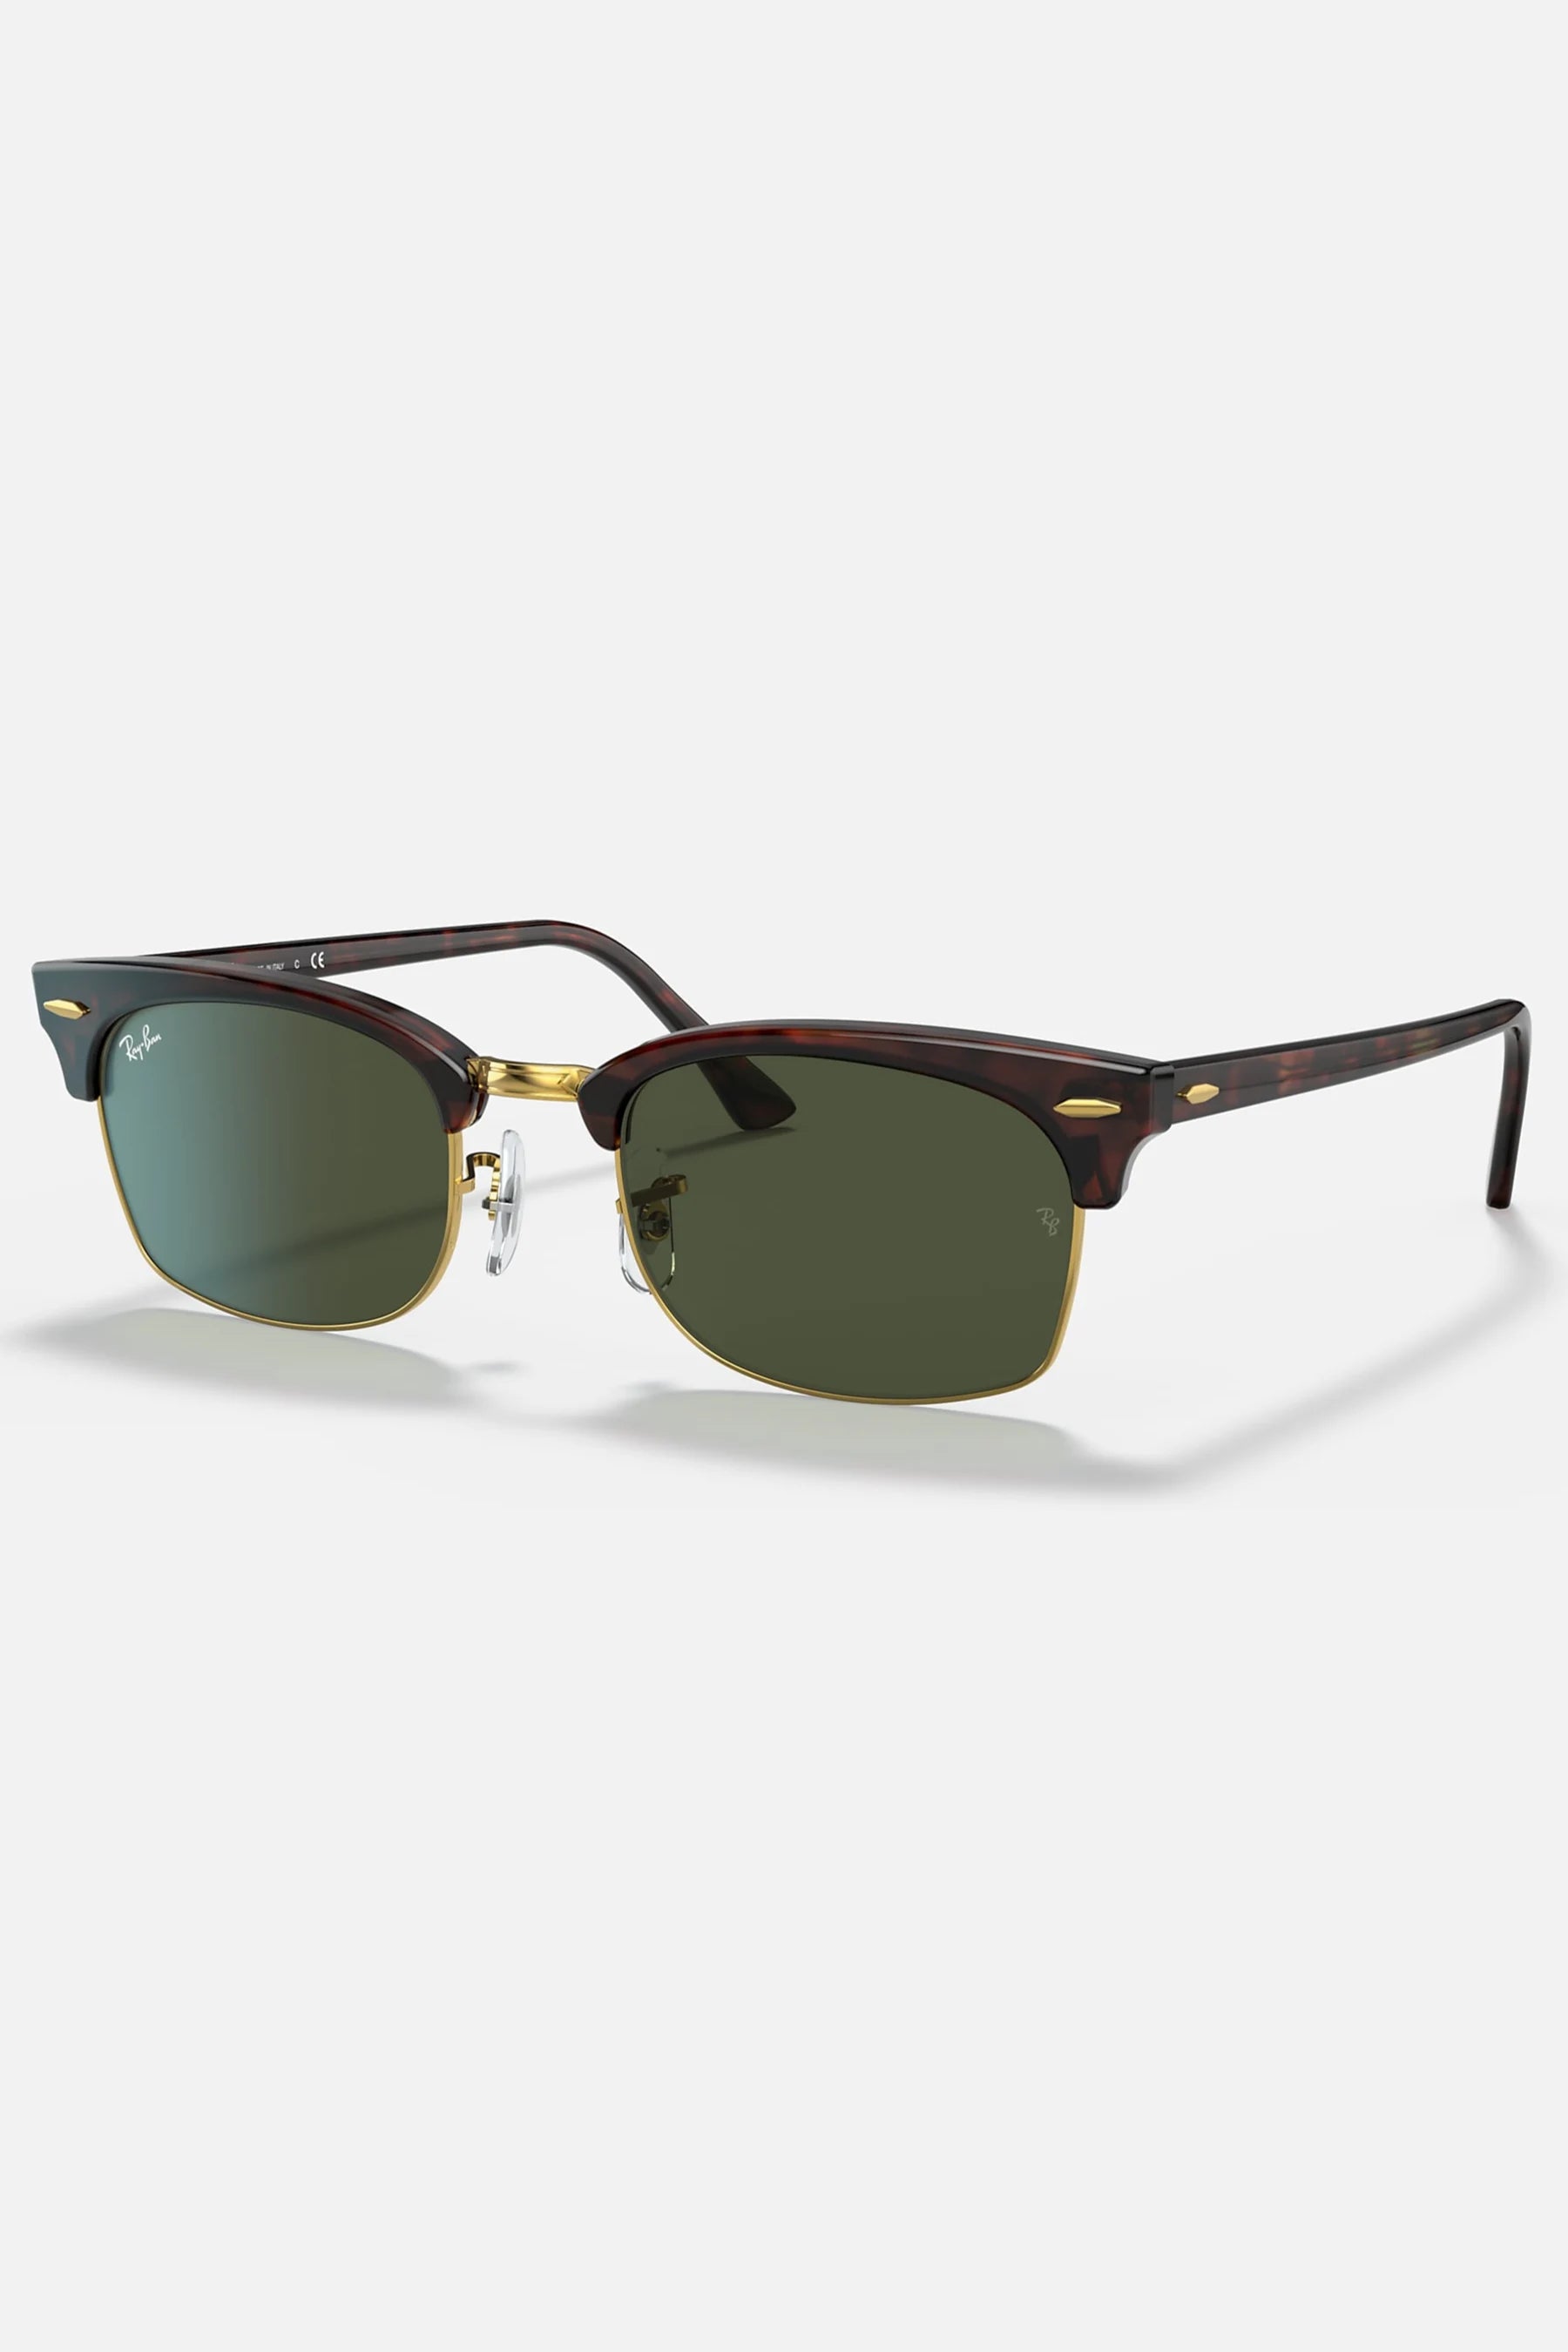 Ray-Ban RB3916 130431 Clubmaster Square Legend Gold